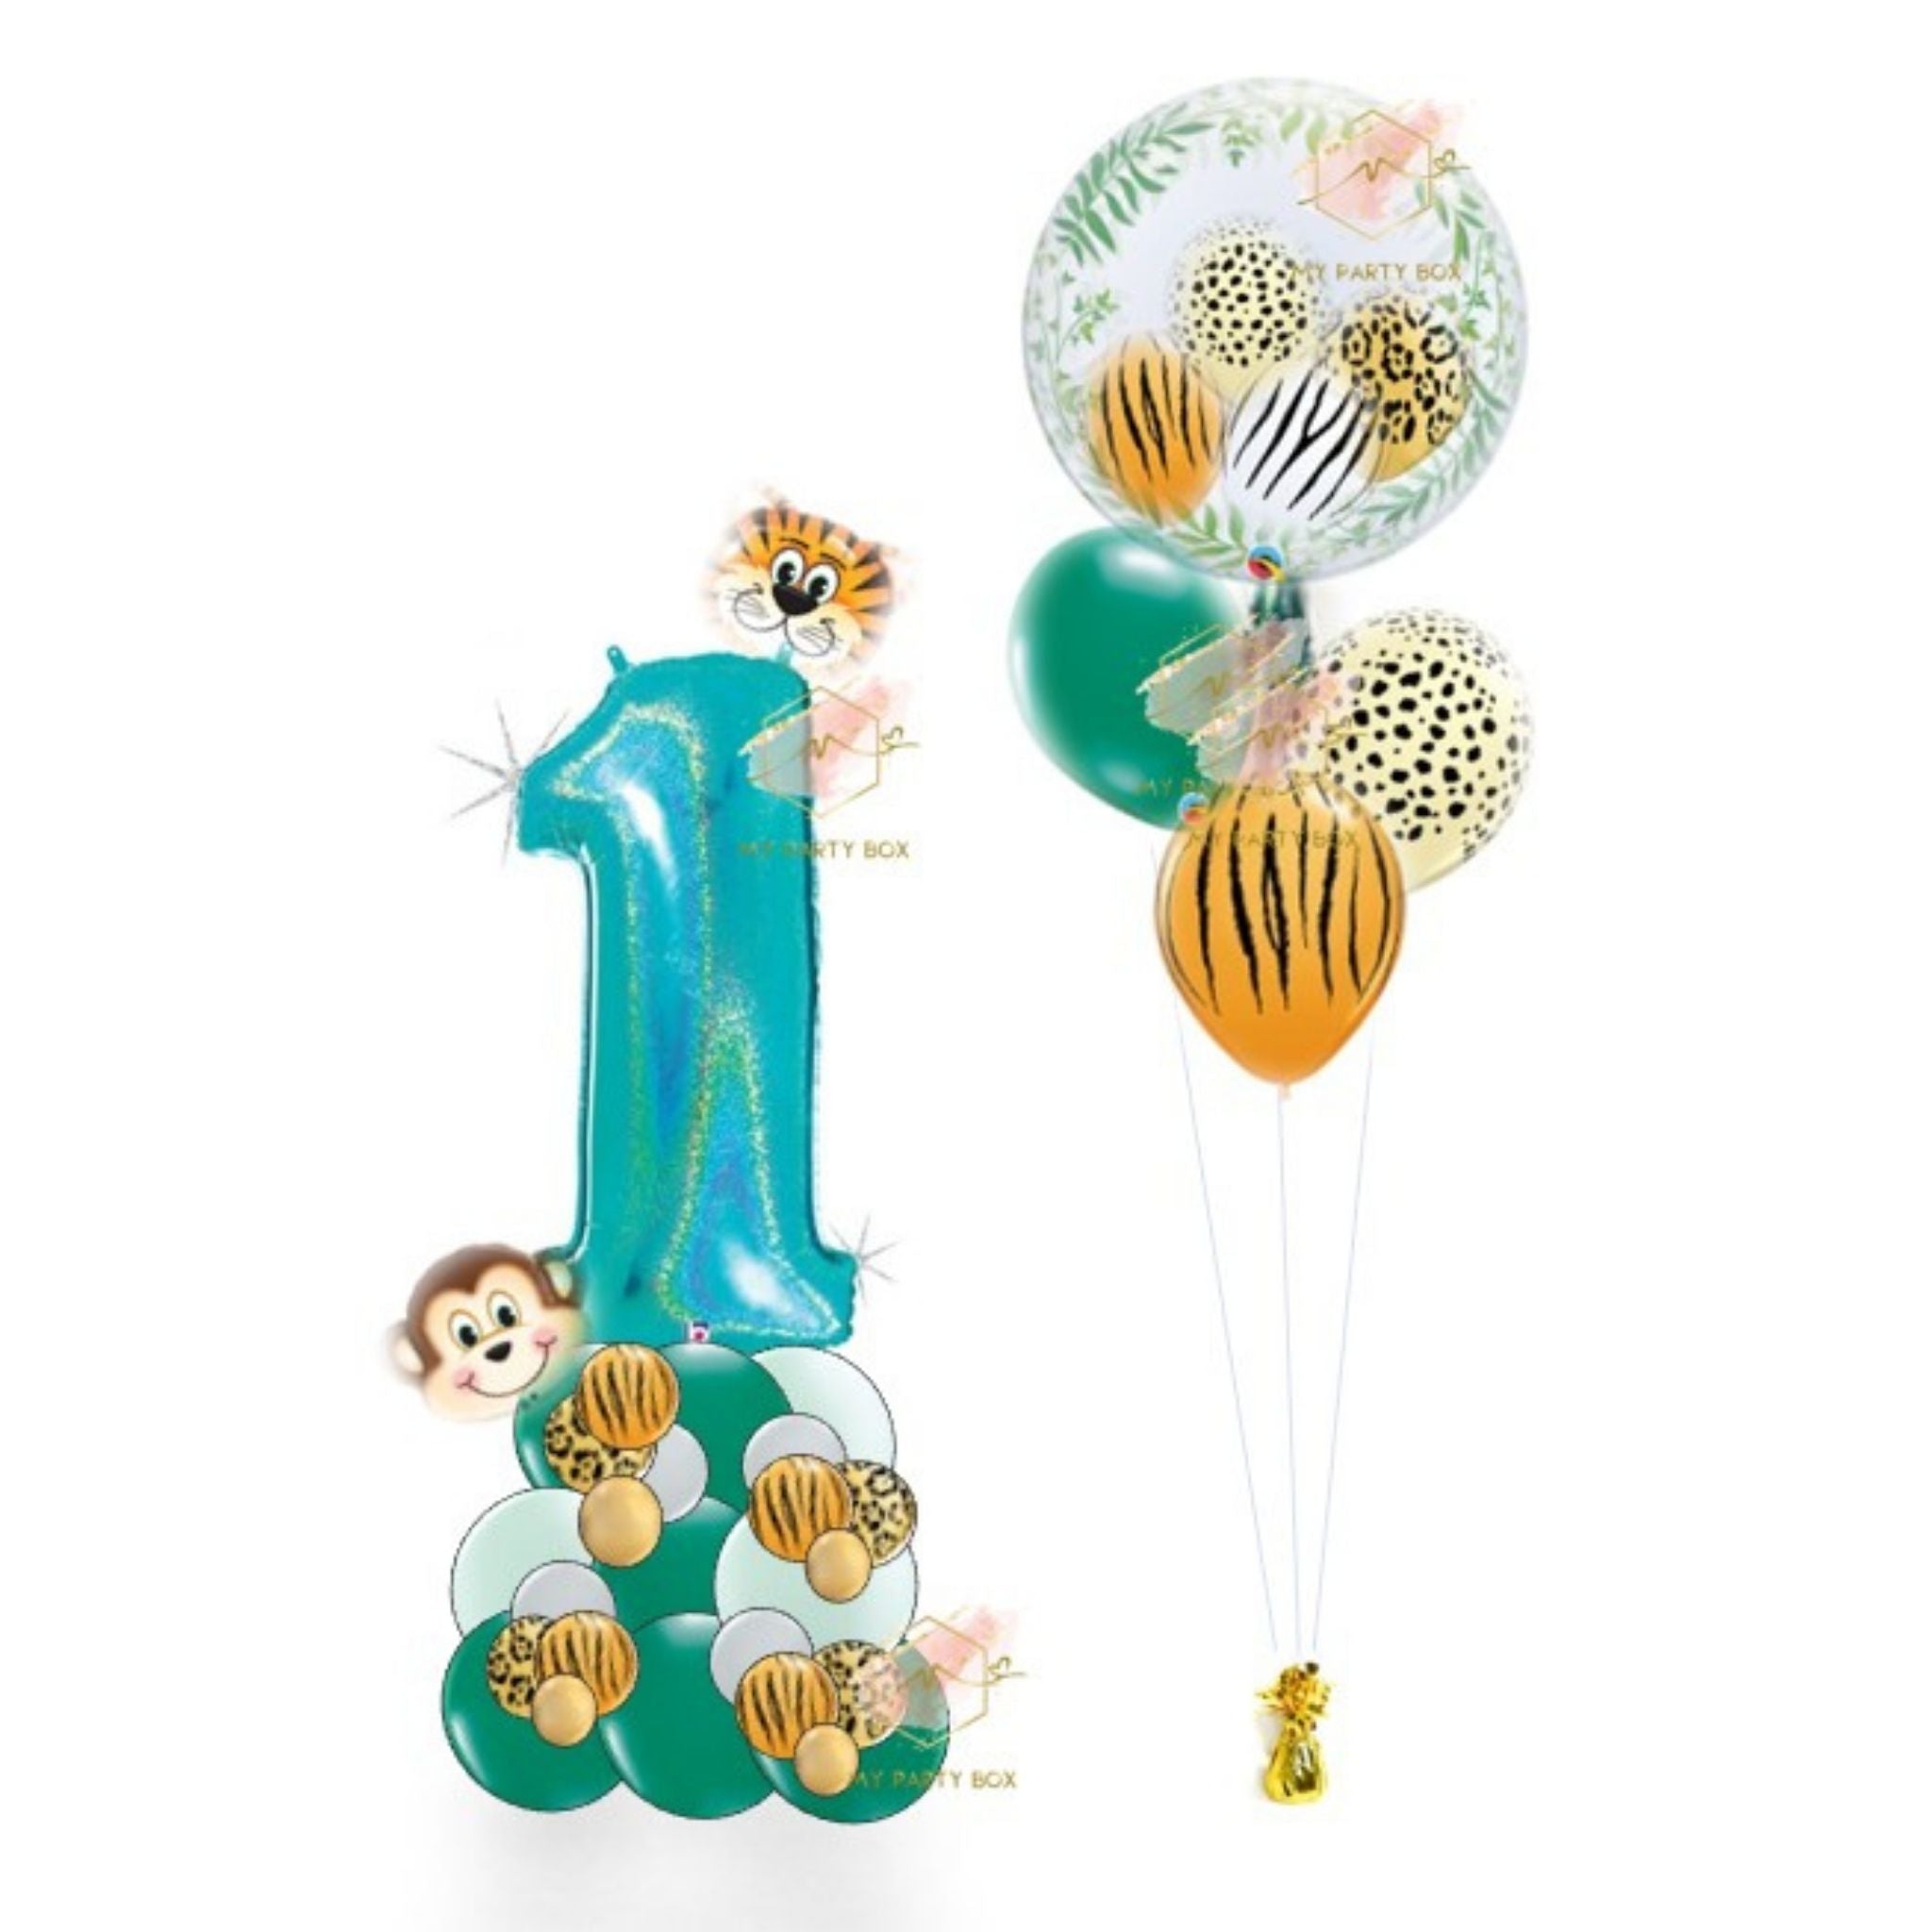 My Party Box Jungle Balloon Bouquet 